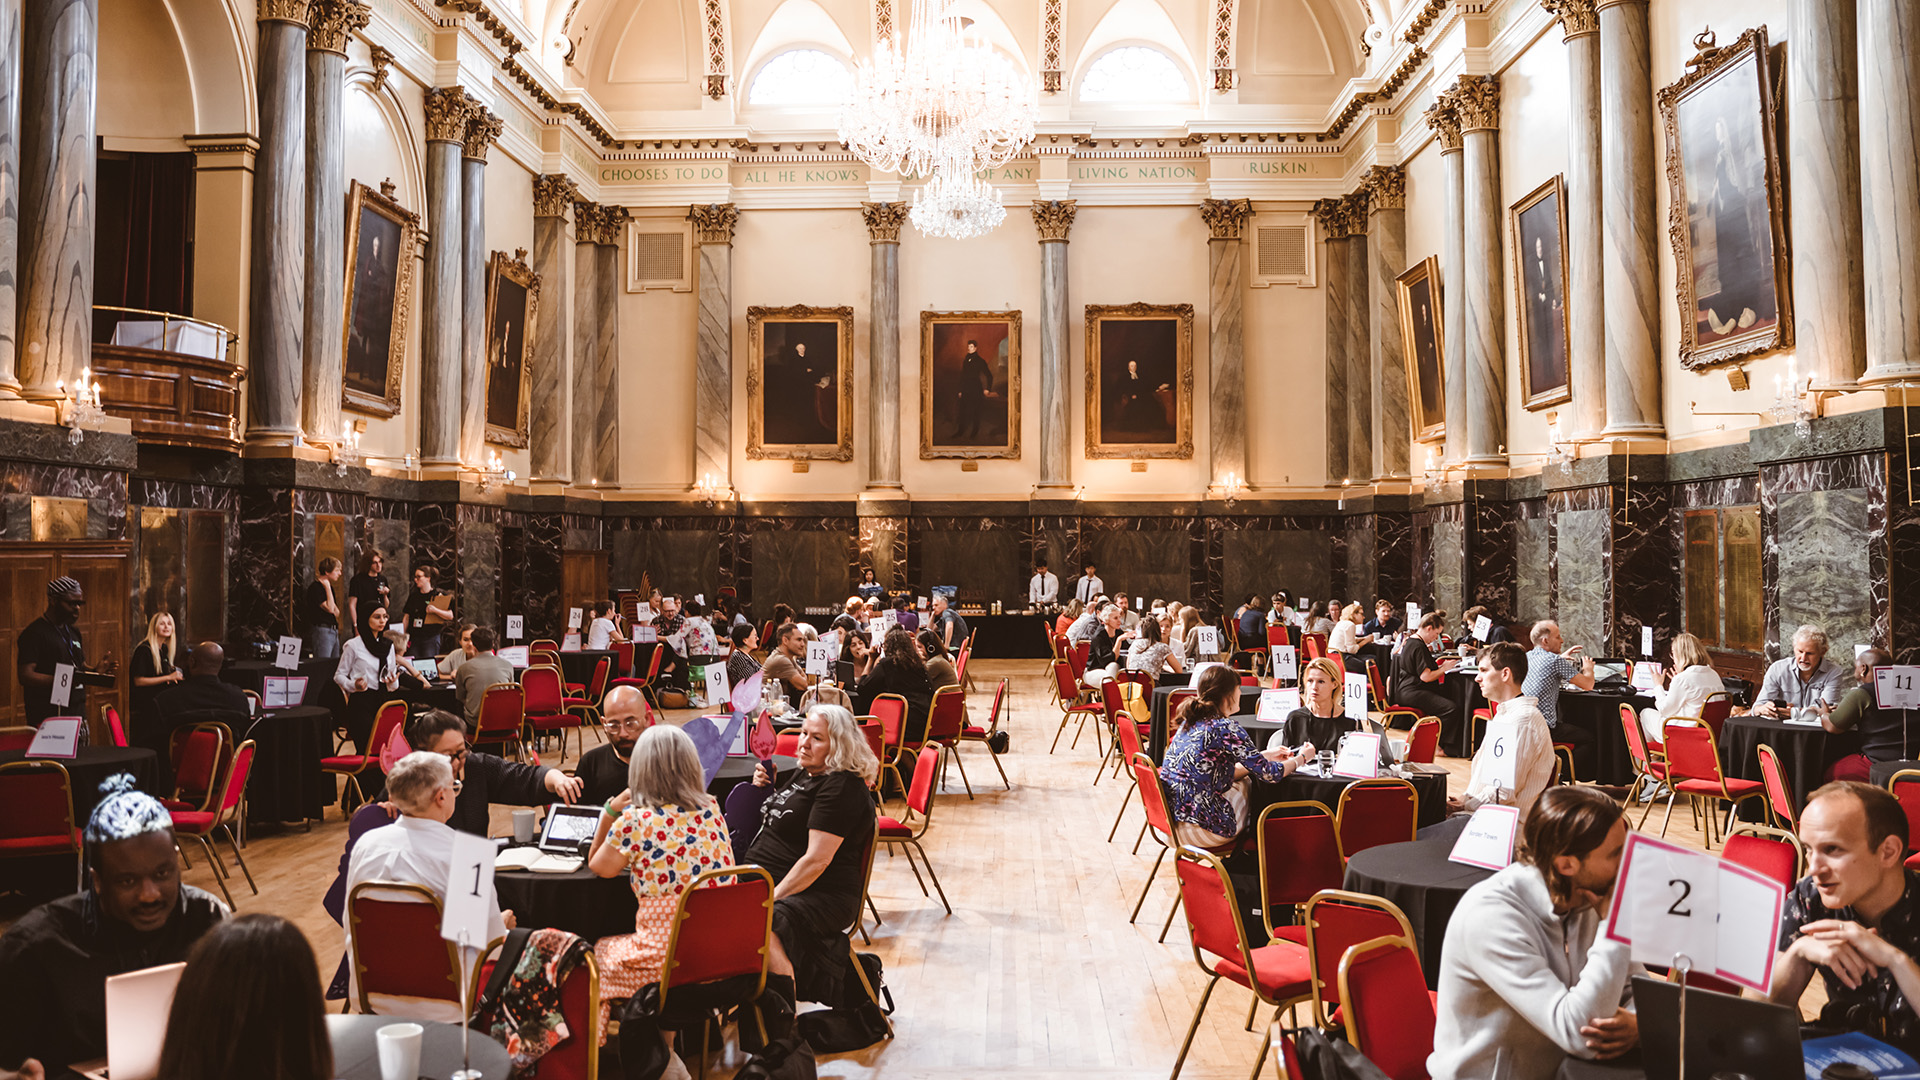 Groups of people sat at tables, in discussion, in a grand hall.